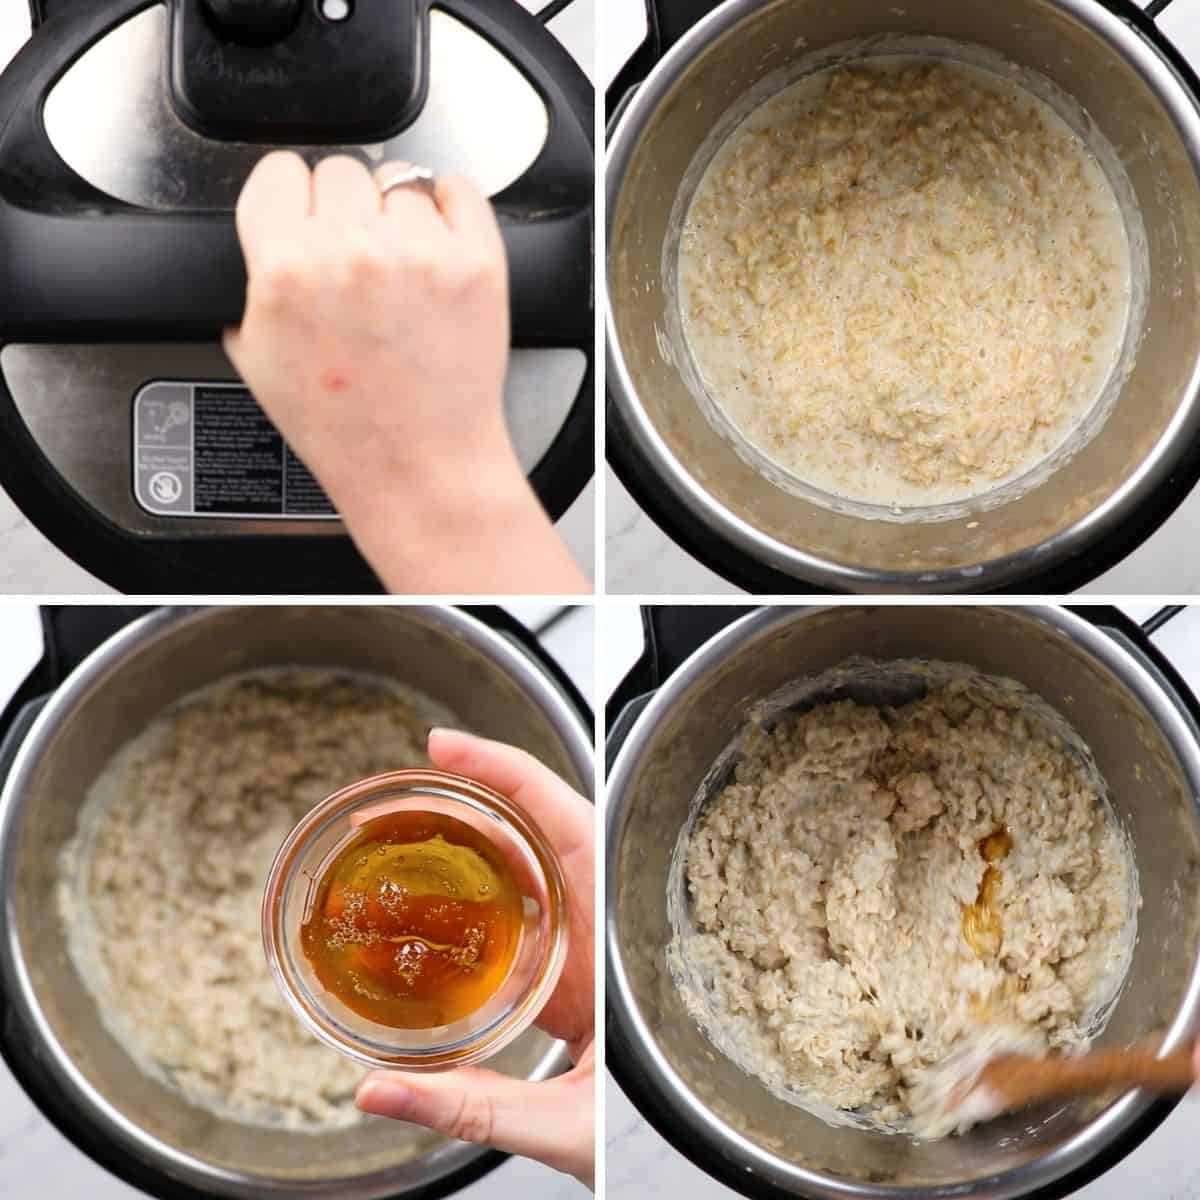 Process photos of cooking oatmeal in a pressure cooker.